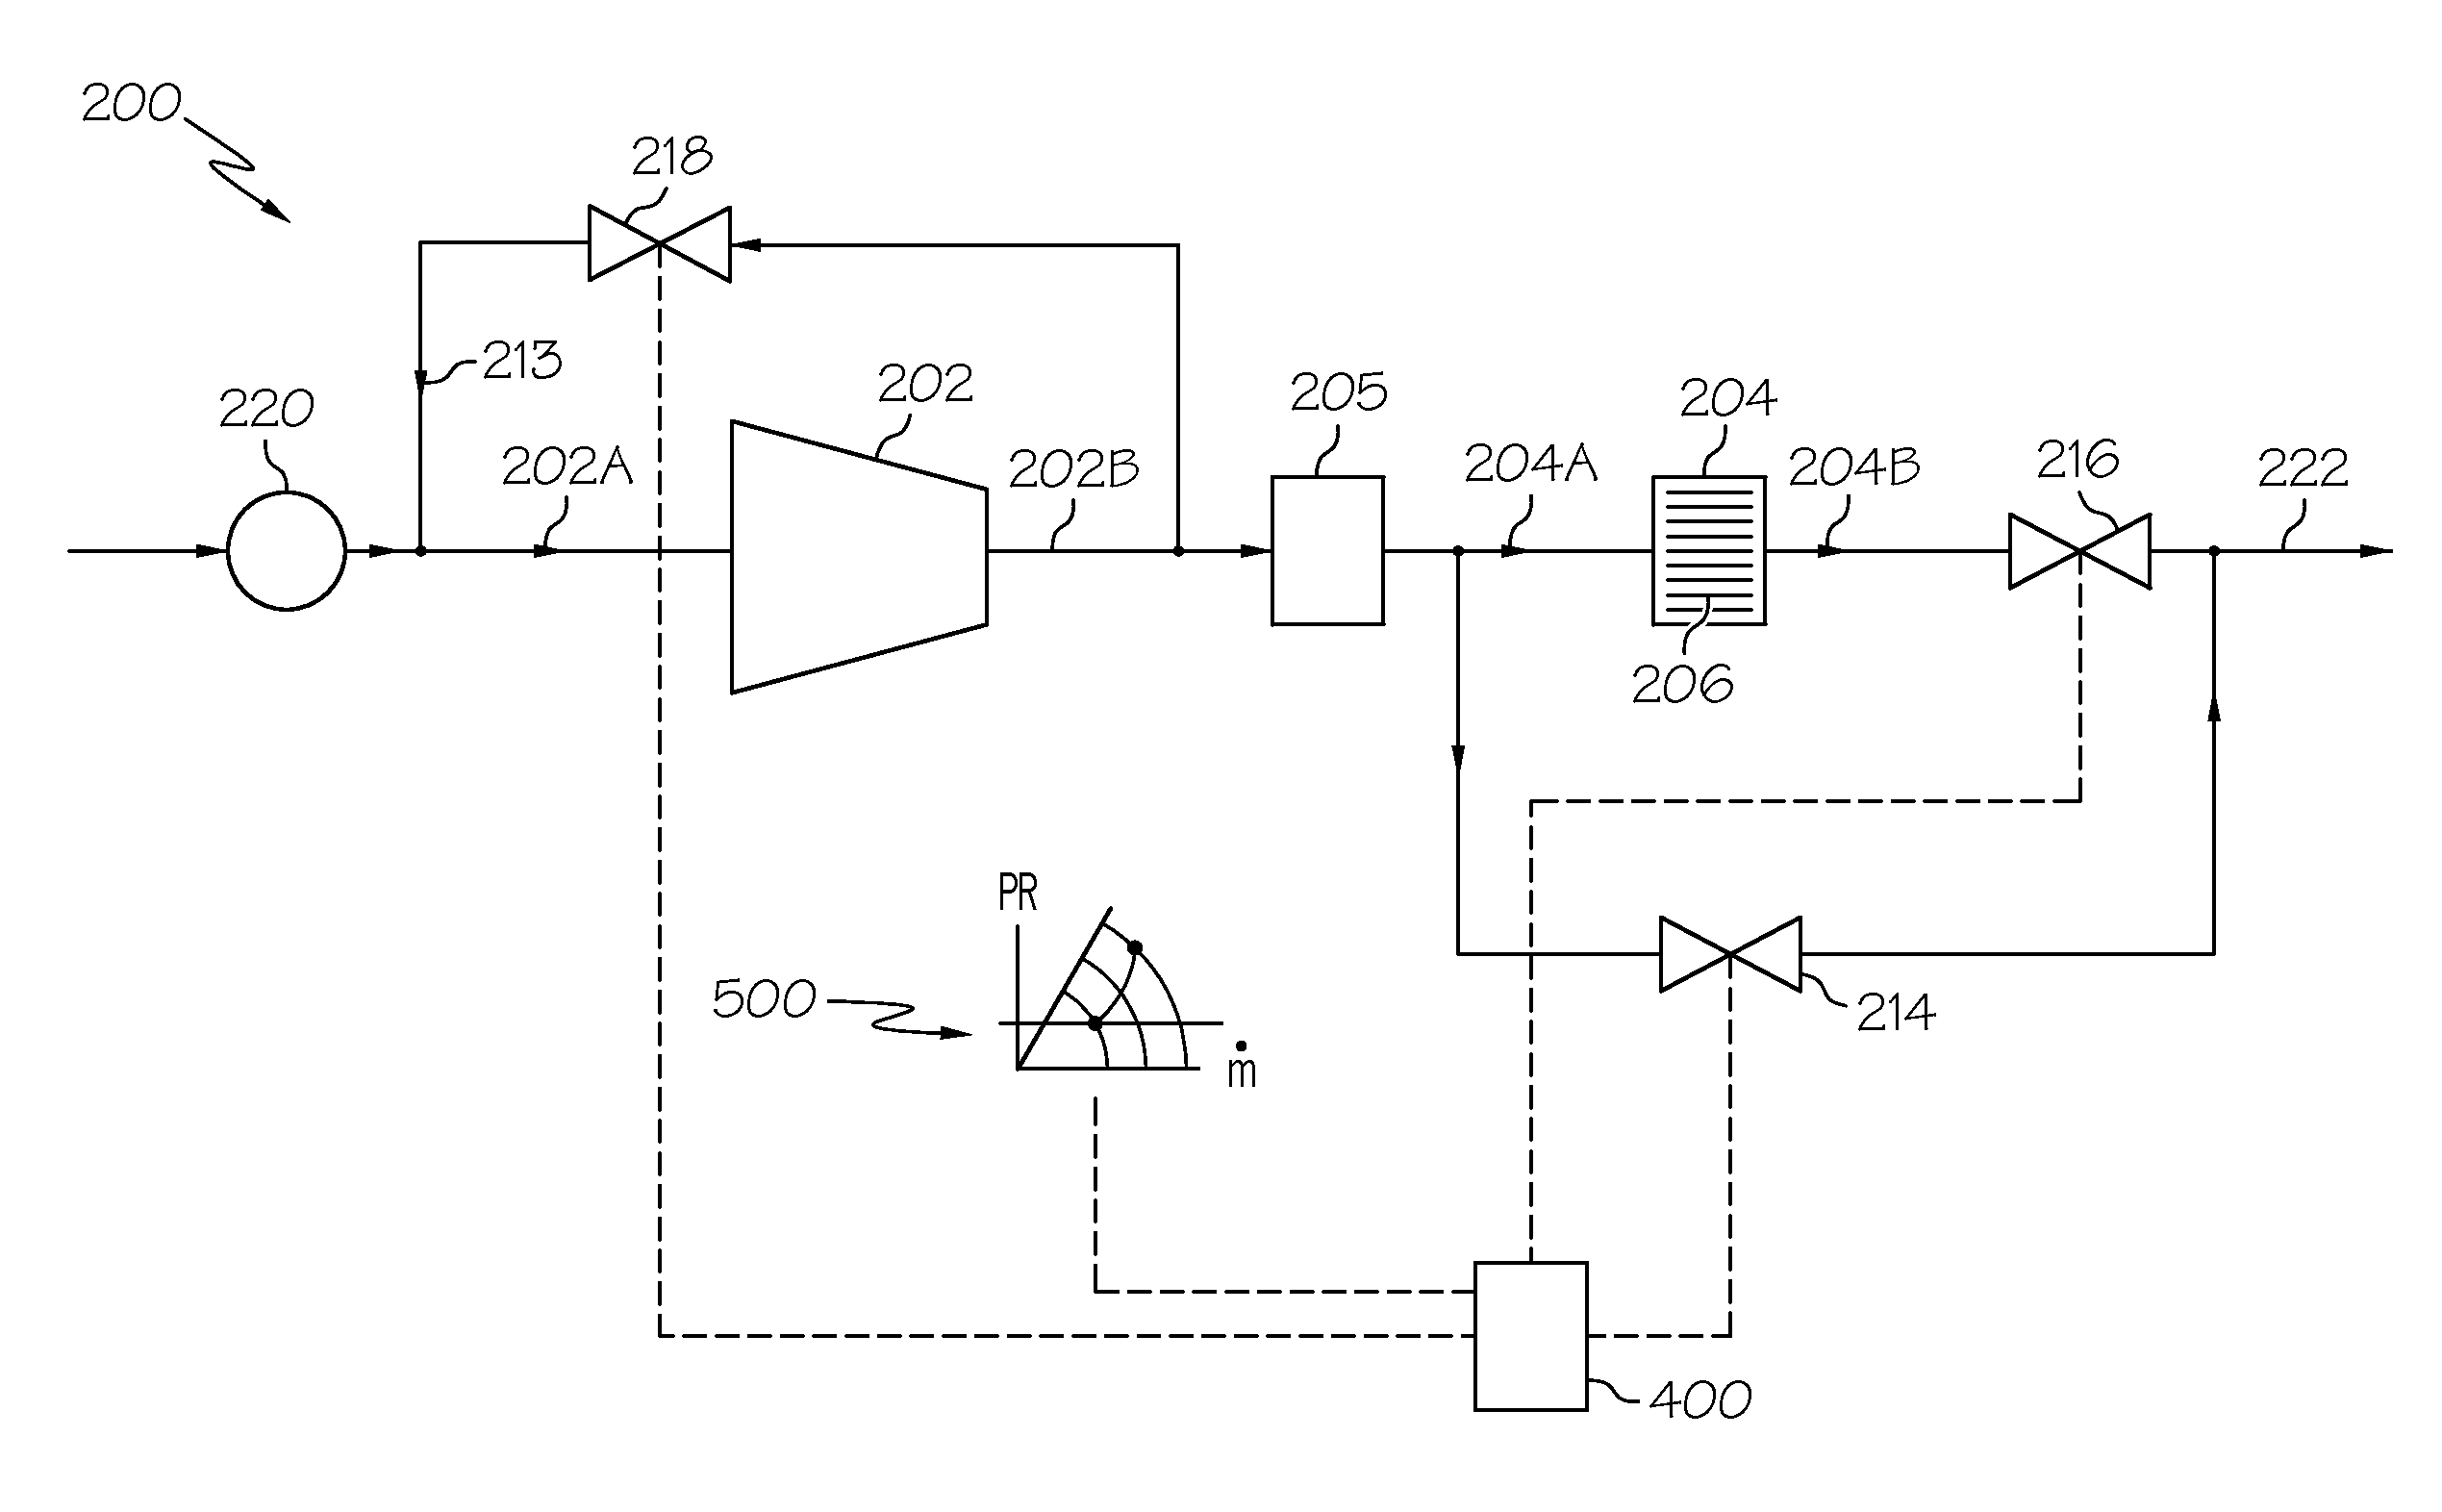 Reactive compressor surge mitigation strategy for a fuel cell power system